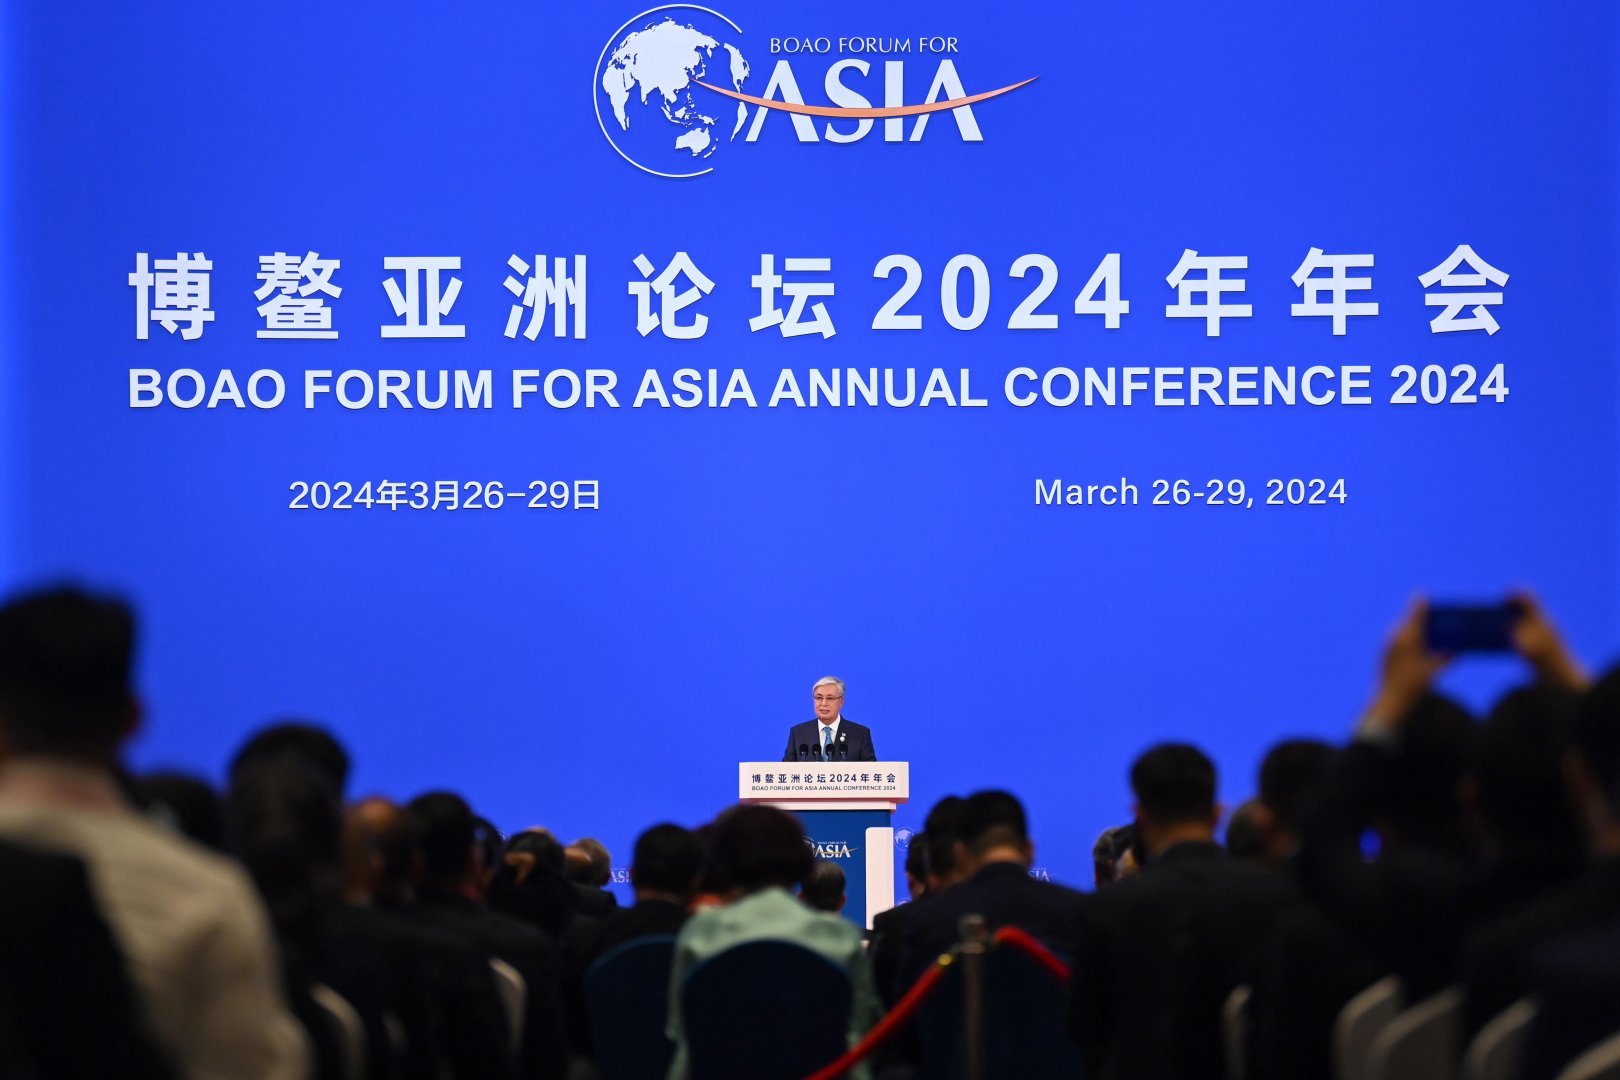 Asia to provide over half of global GDP growth in 2024 - Kazakh president